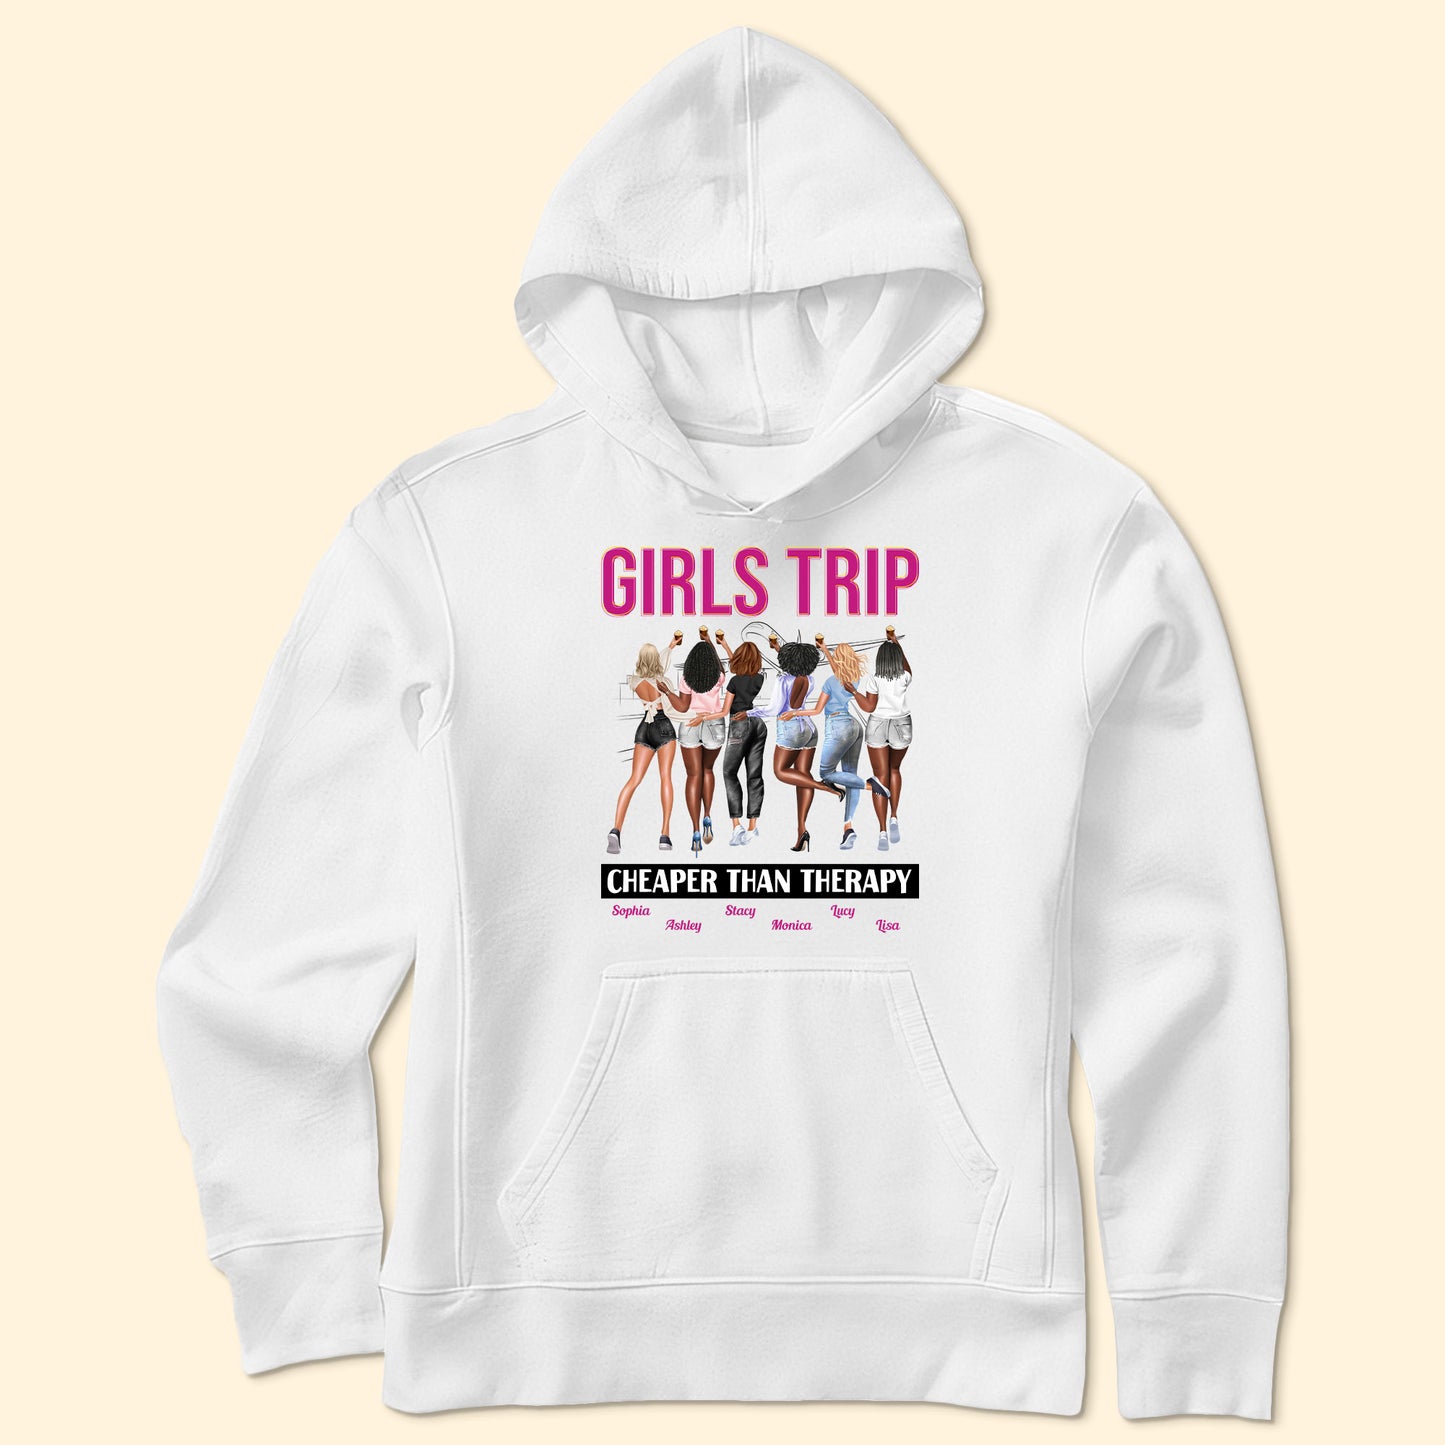 Girls Trip Is Cheaper Than Therapy - Personalized Shirt